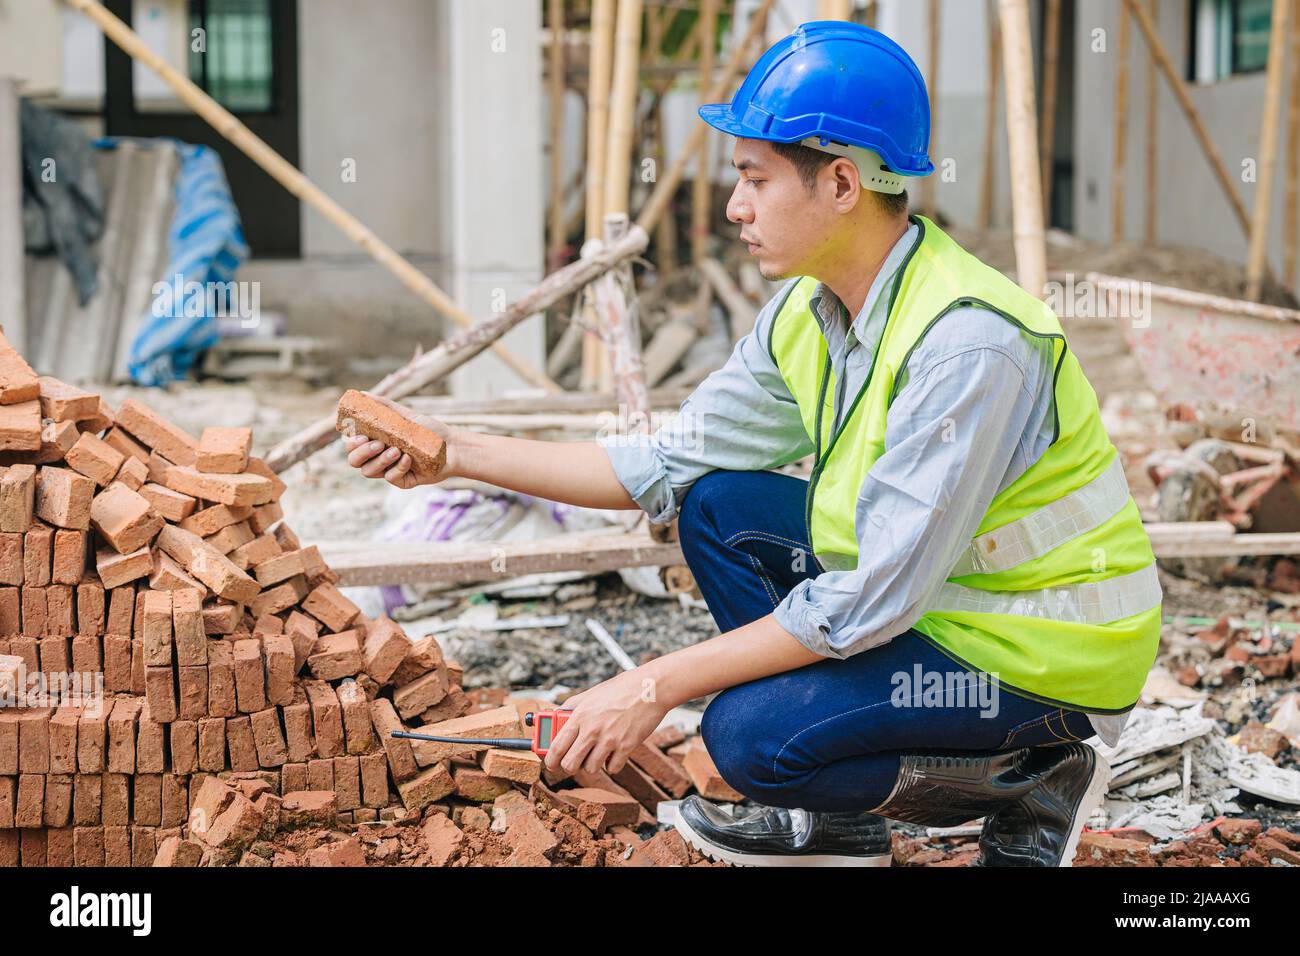 Engineer foreman manager quality check Burnt Clay Bricks for good construction building project Stock Photo